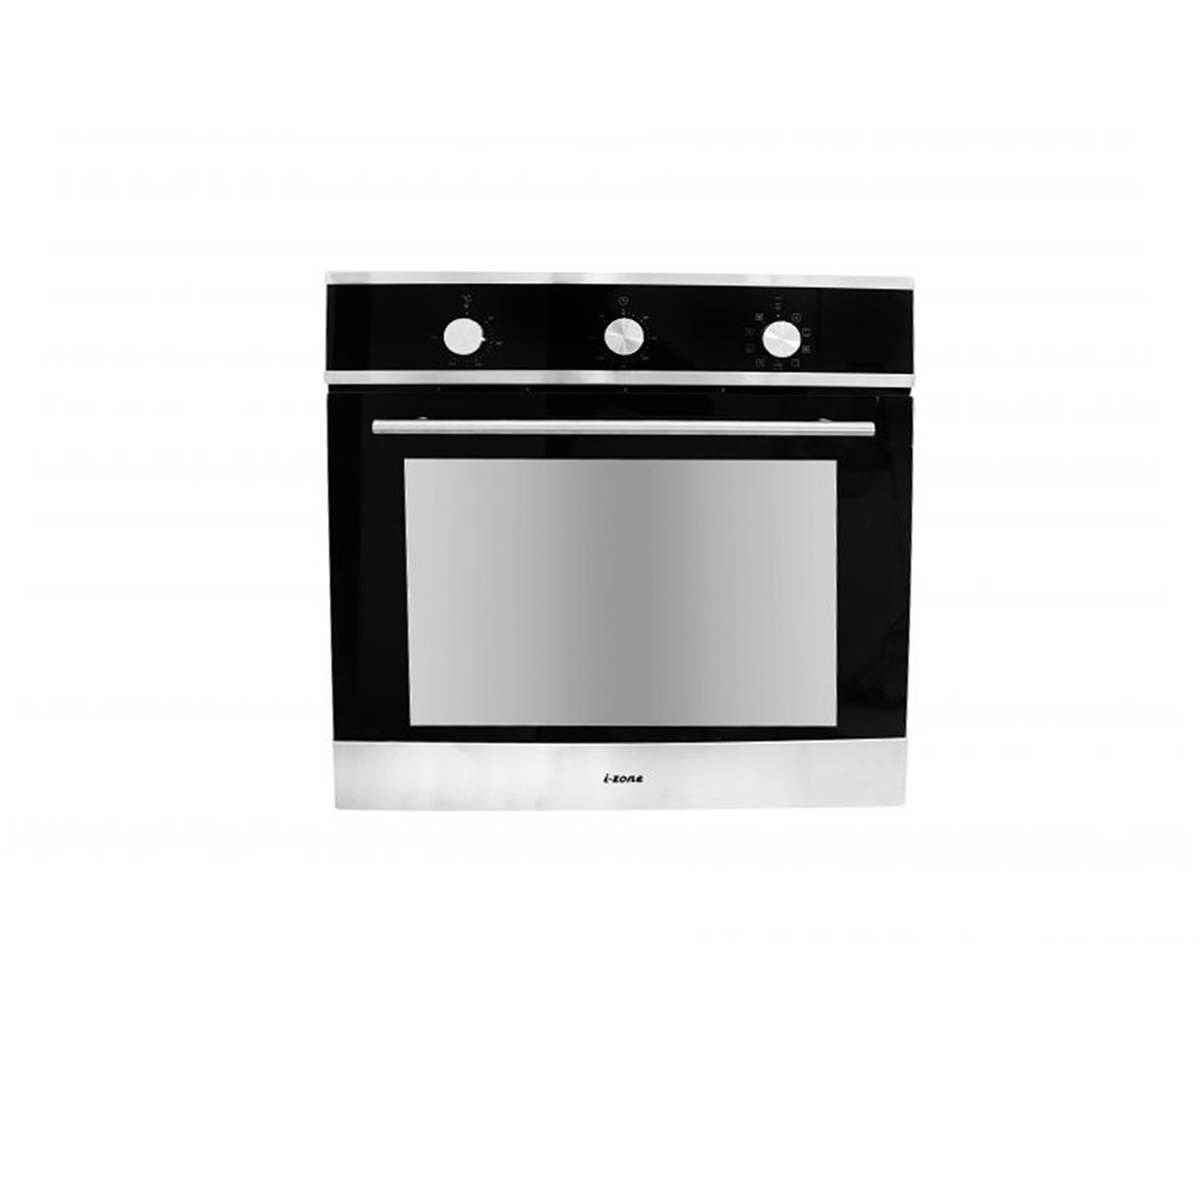 i-zone-Built-in-Oven-MAS-1010ES-8-Function-70L